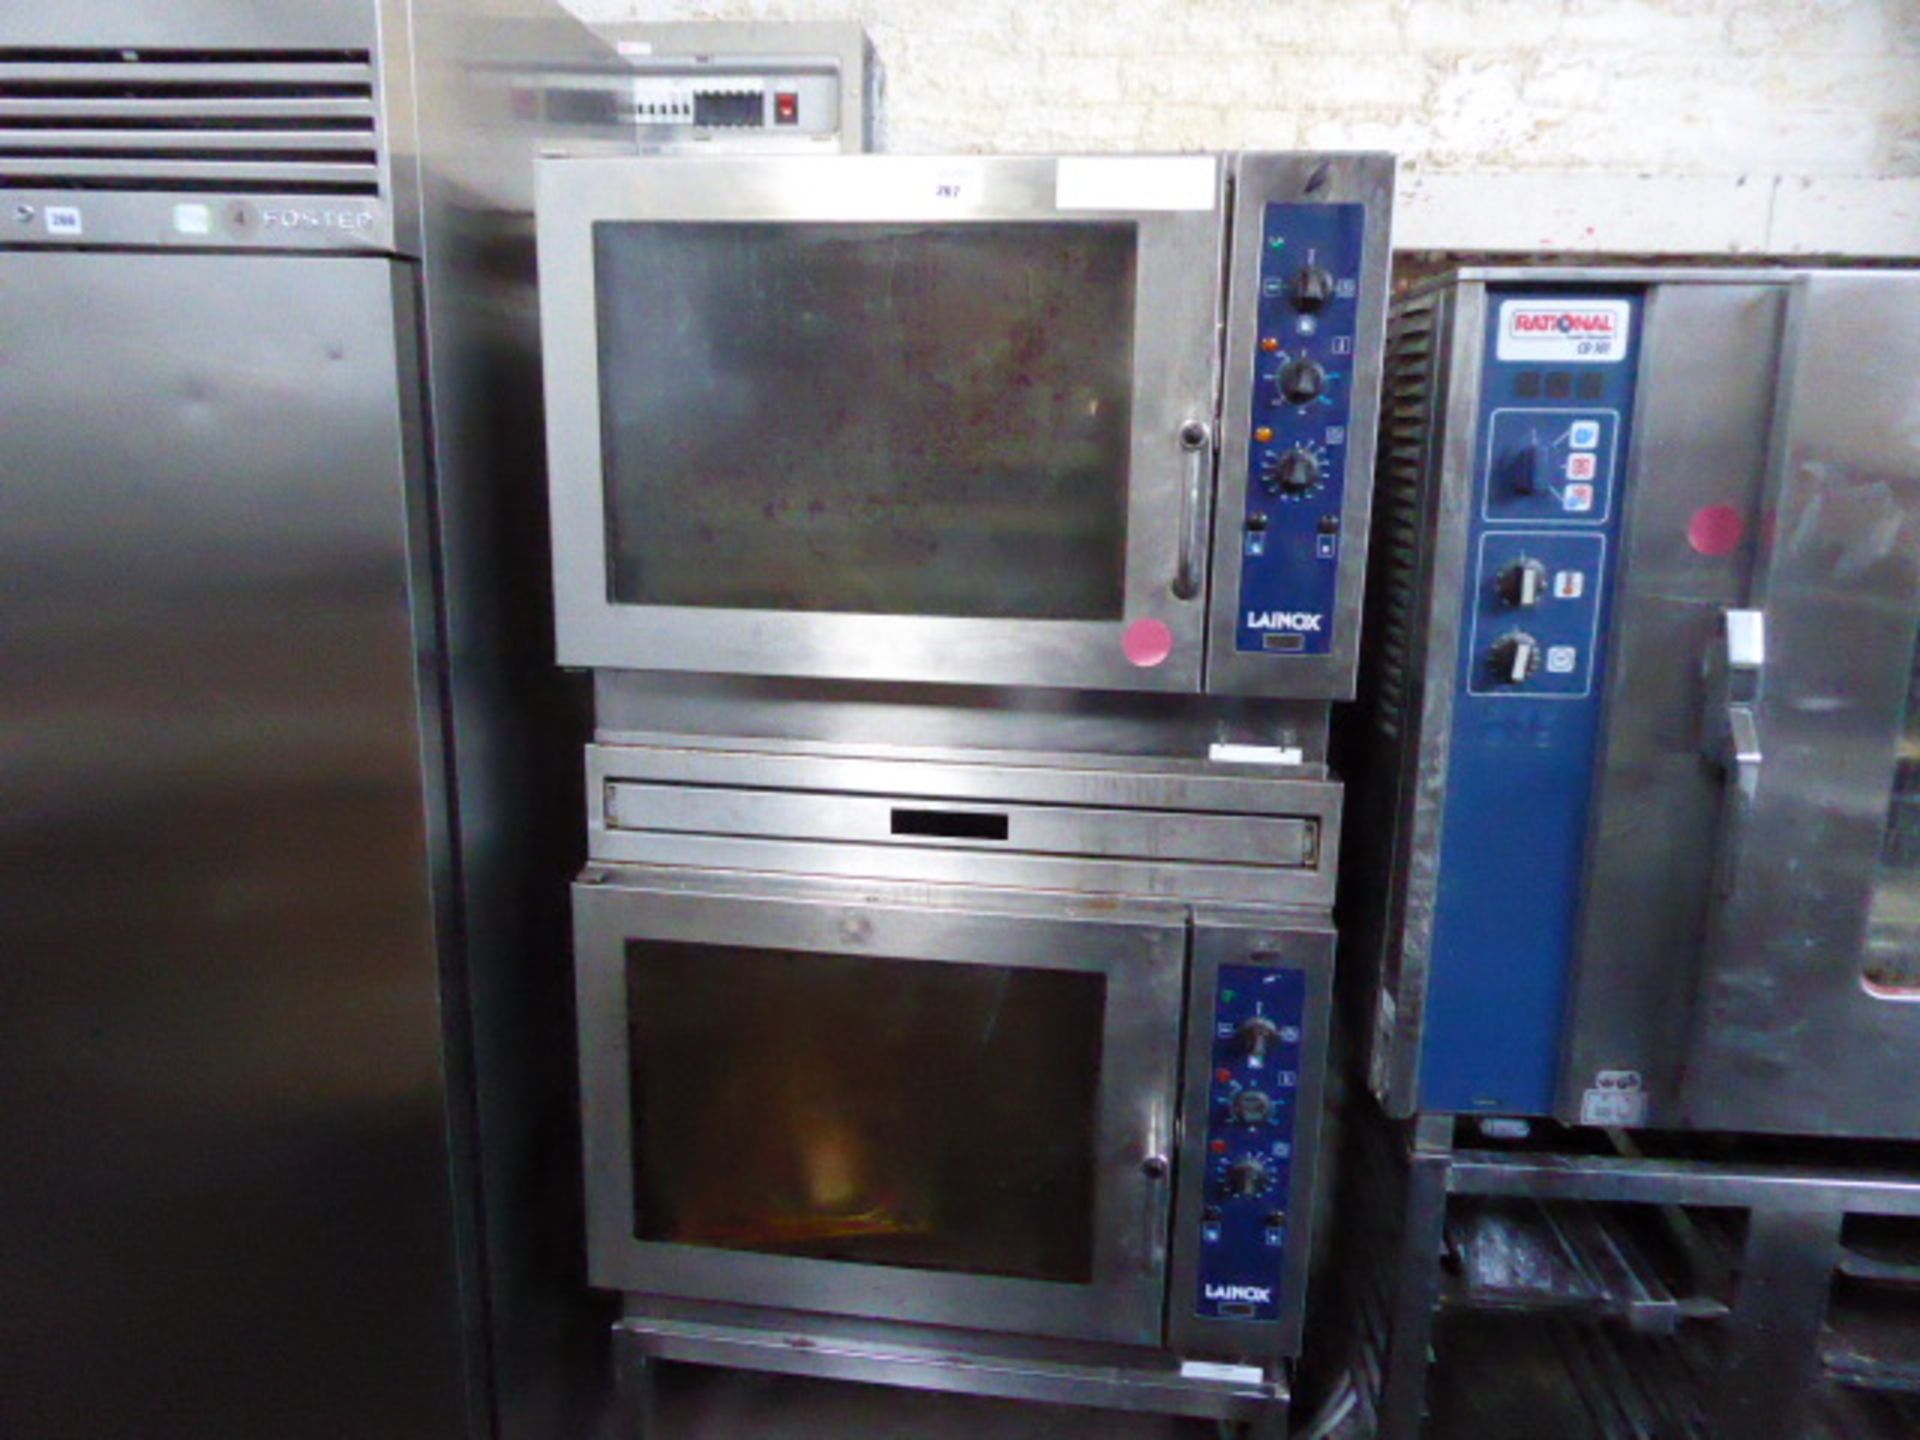 85cm Lainox double stack oven on trolley